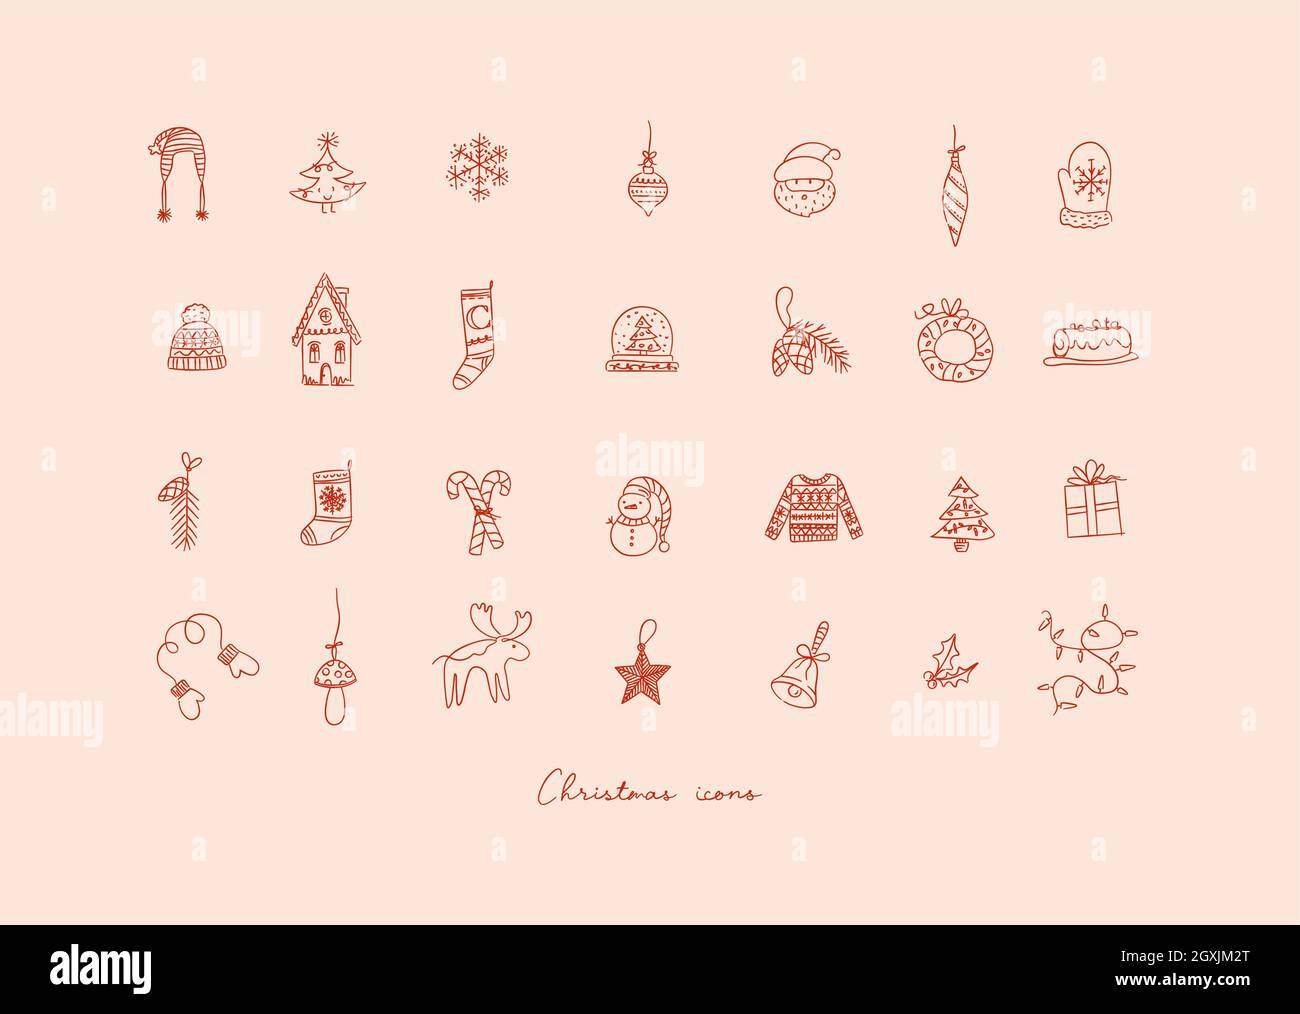 Christmas icons drawing in hand sketch style on peach color background Stock Vector